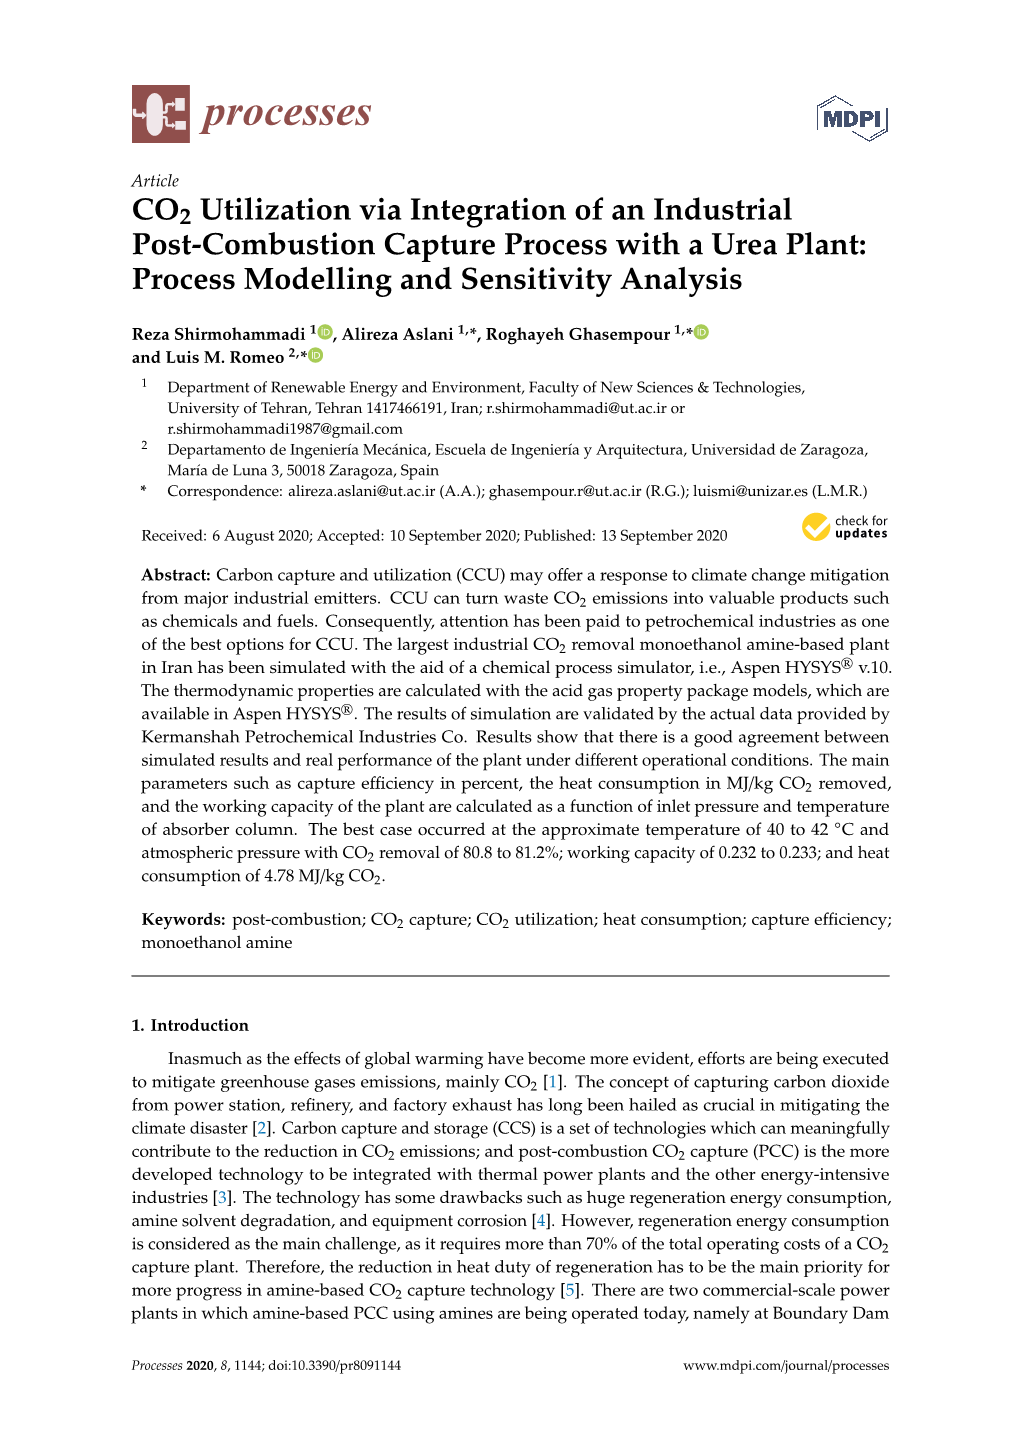 CO2 Utilization Via Integration of an Industrial Post-Combustion Capture Process with a Urea Plant: Process Modelling and Sensitivity Analysis